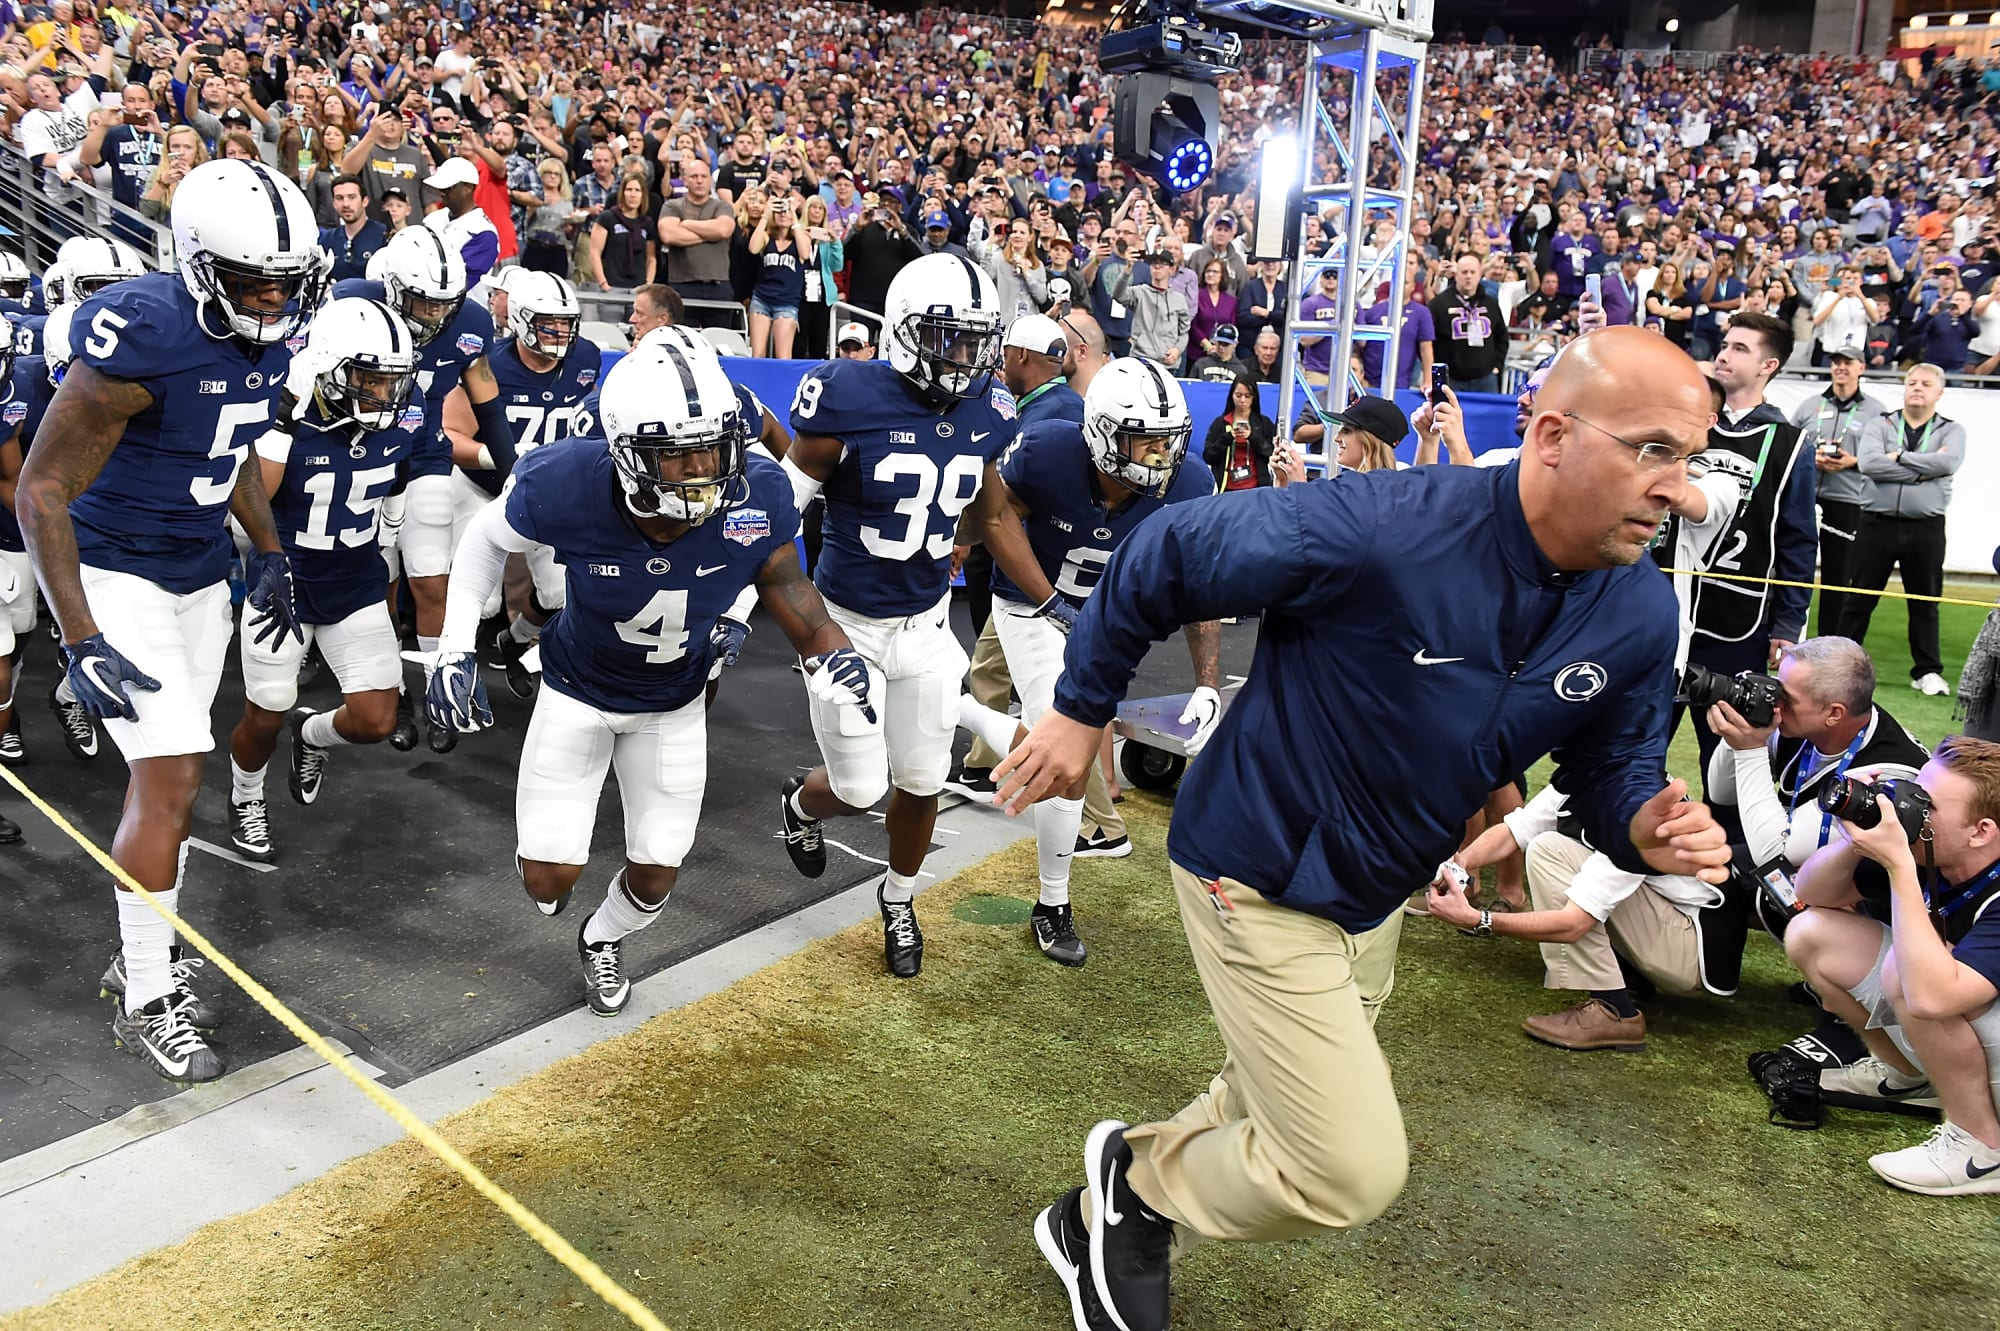 Here's where the latest bowl predictions have Penn State football playing